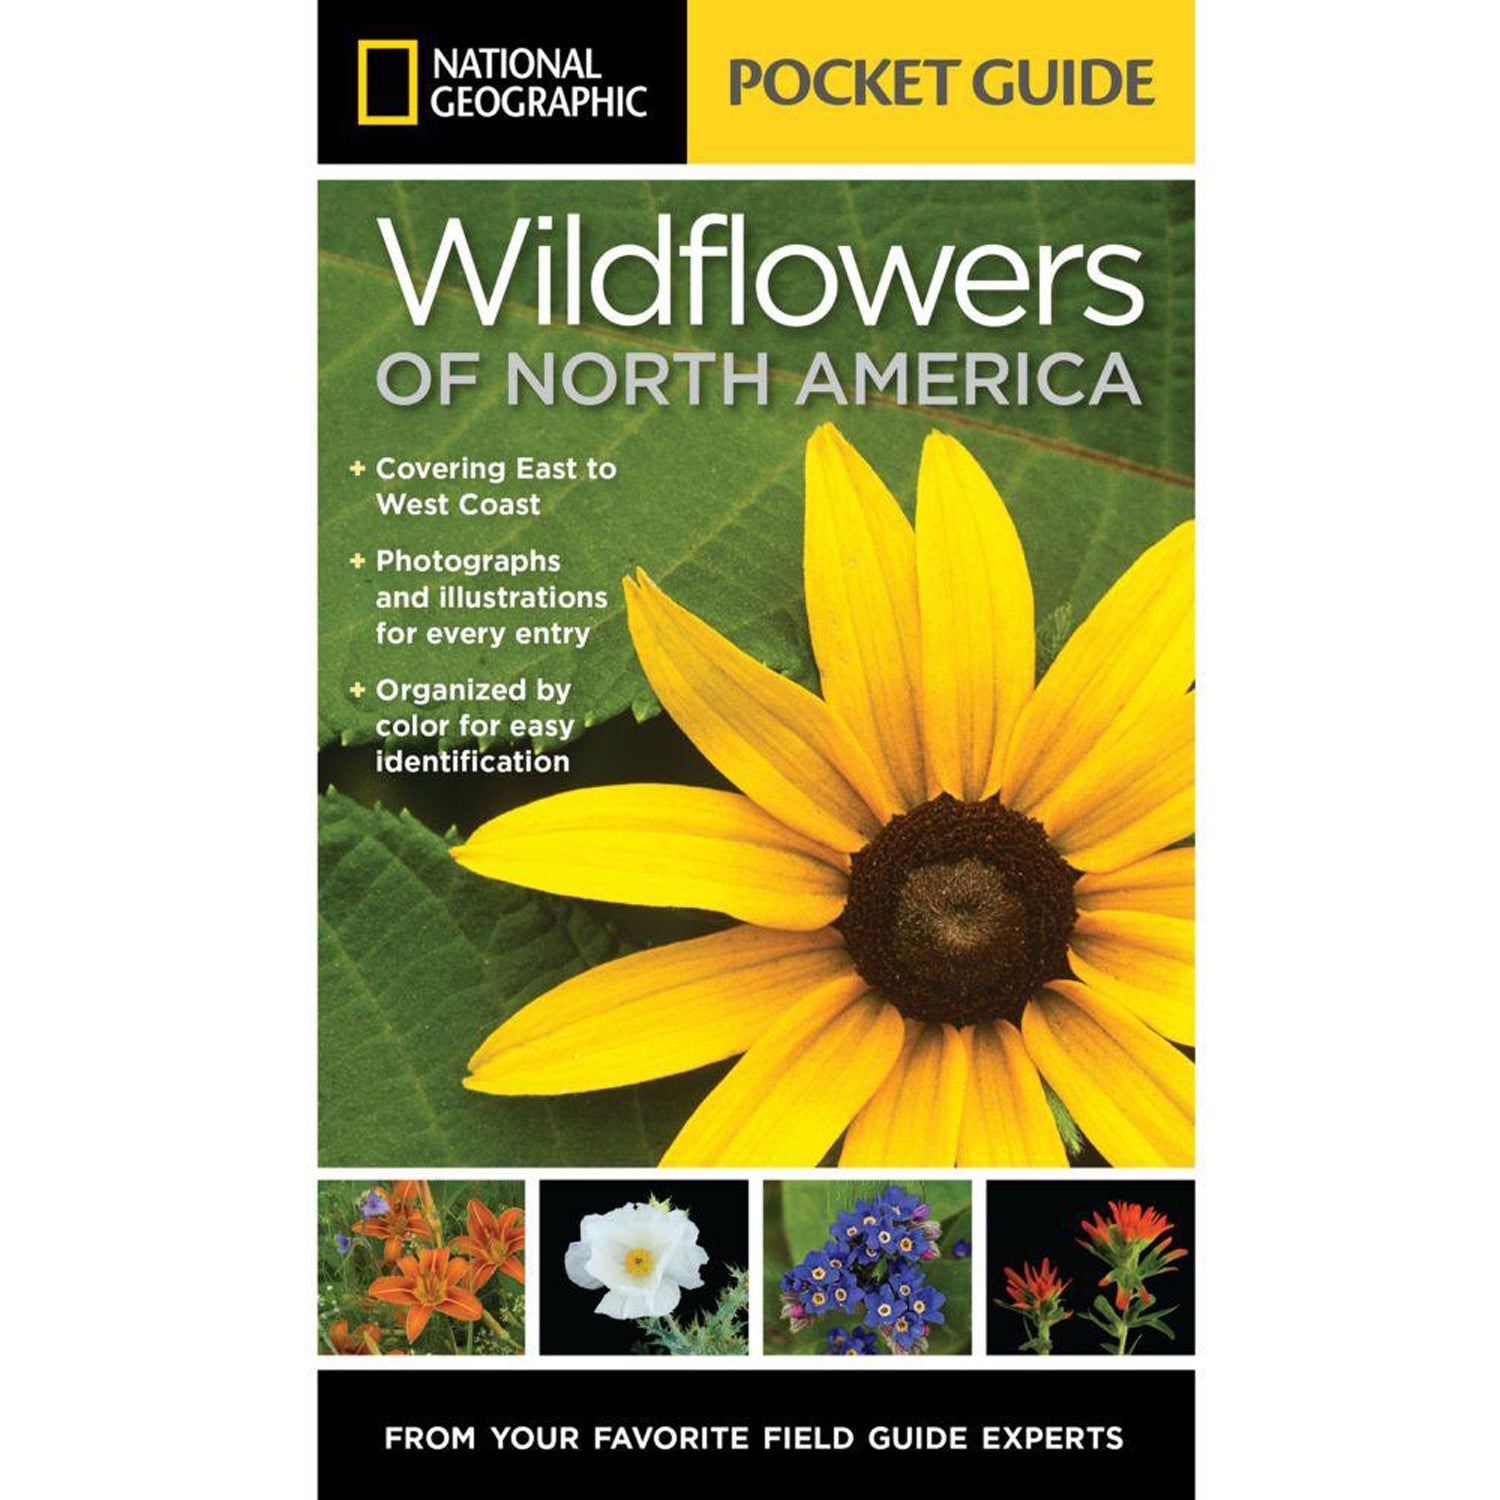 Pocket Guide To Wildflowers Of North America